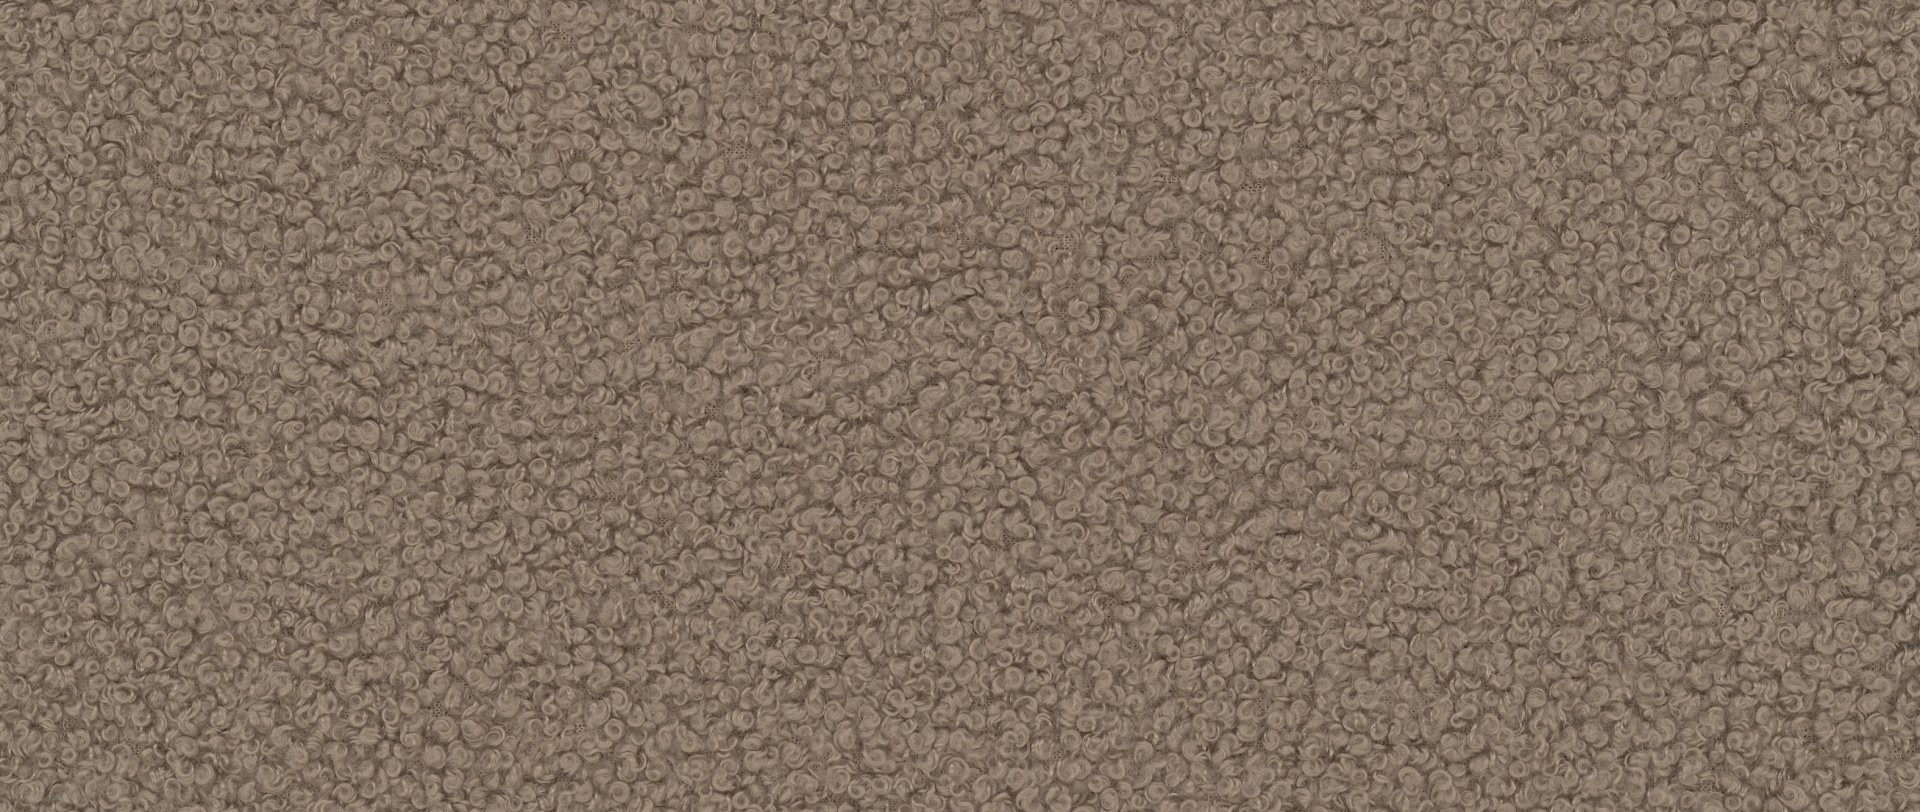 6004 Bouclette Taupe